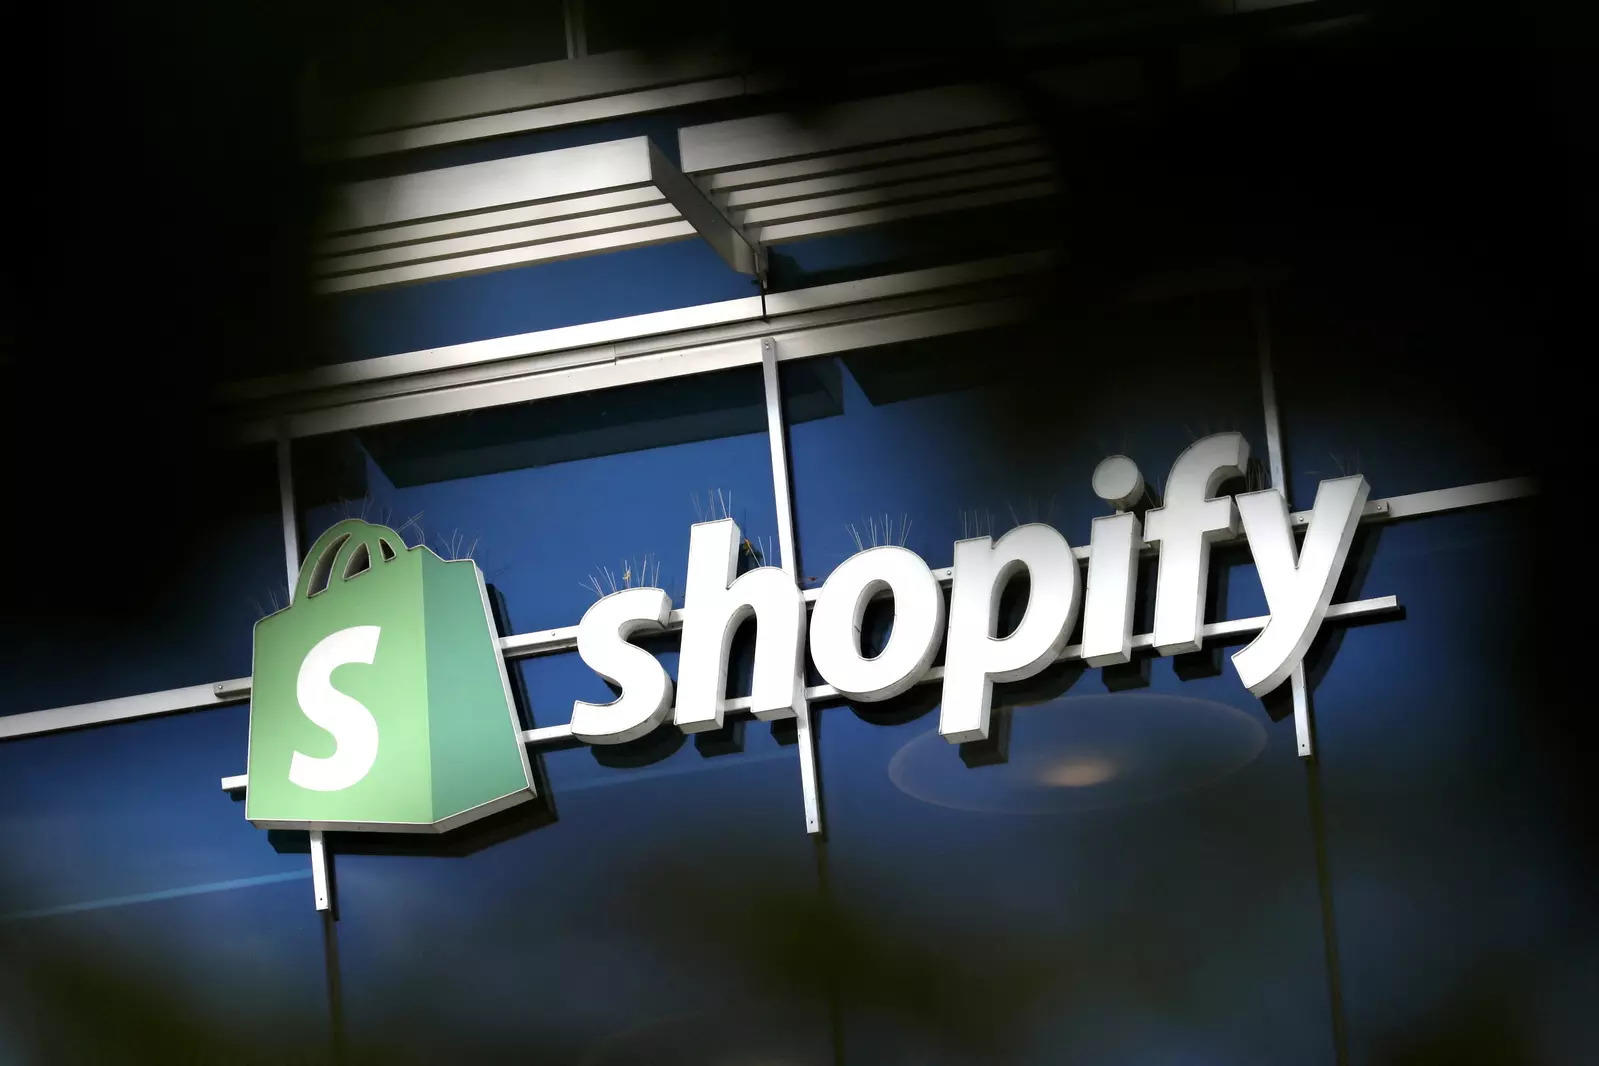 Shopify's revenue growth slowest in seven years, shares plunge